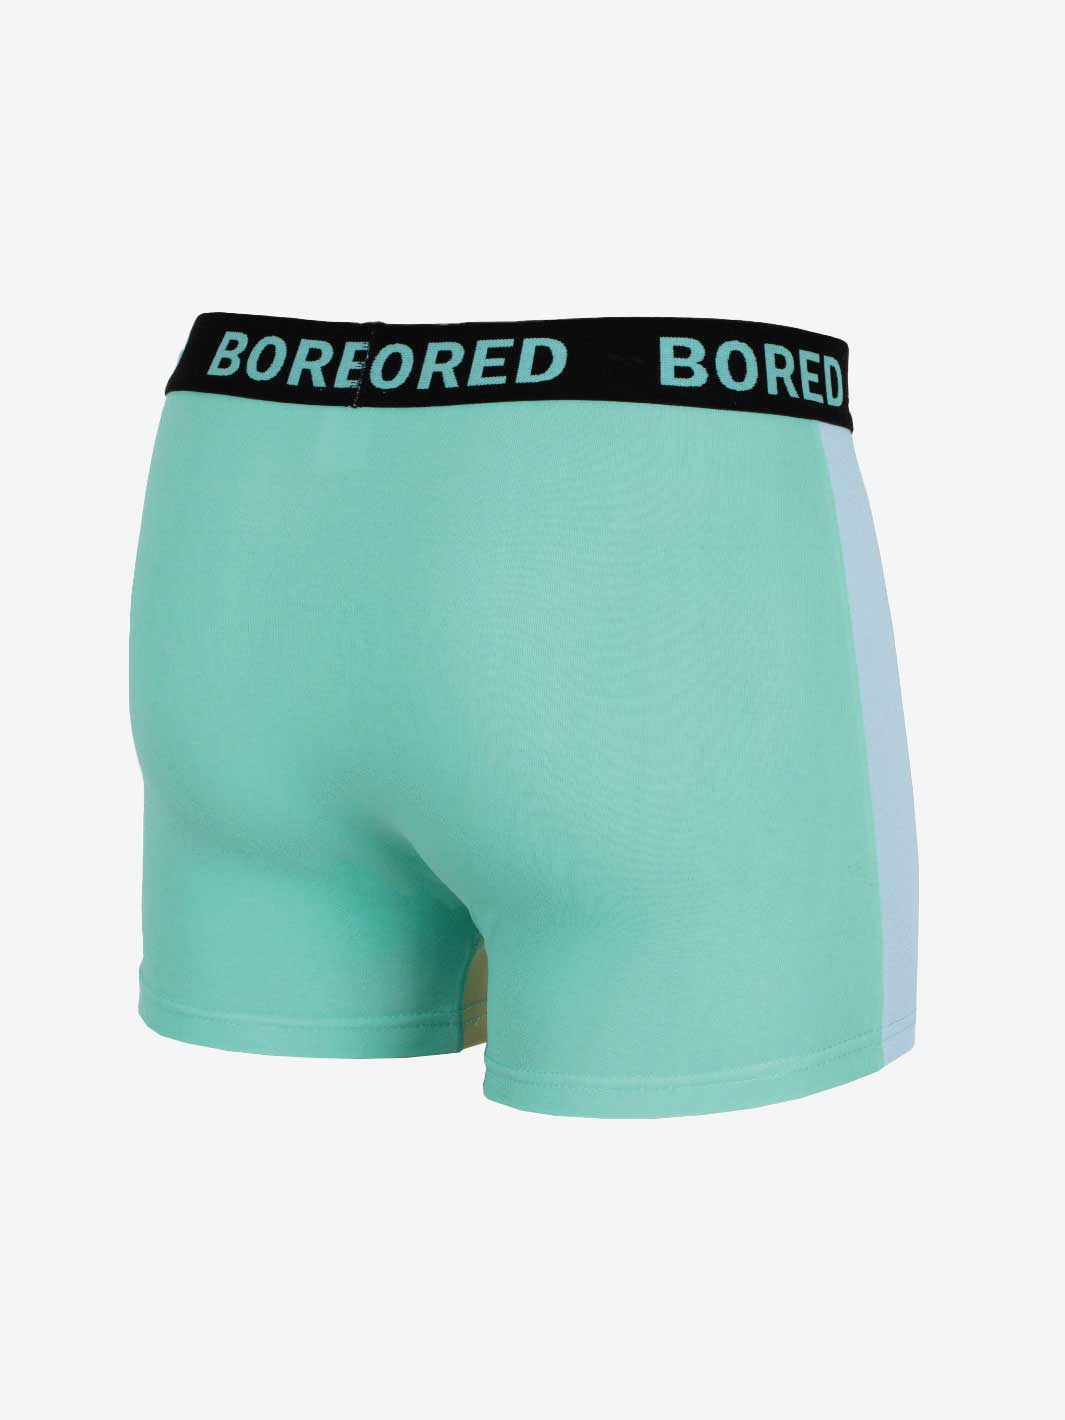 BORED APES #9461 X TRYHARDER | COLOUR BLOCK BOXER